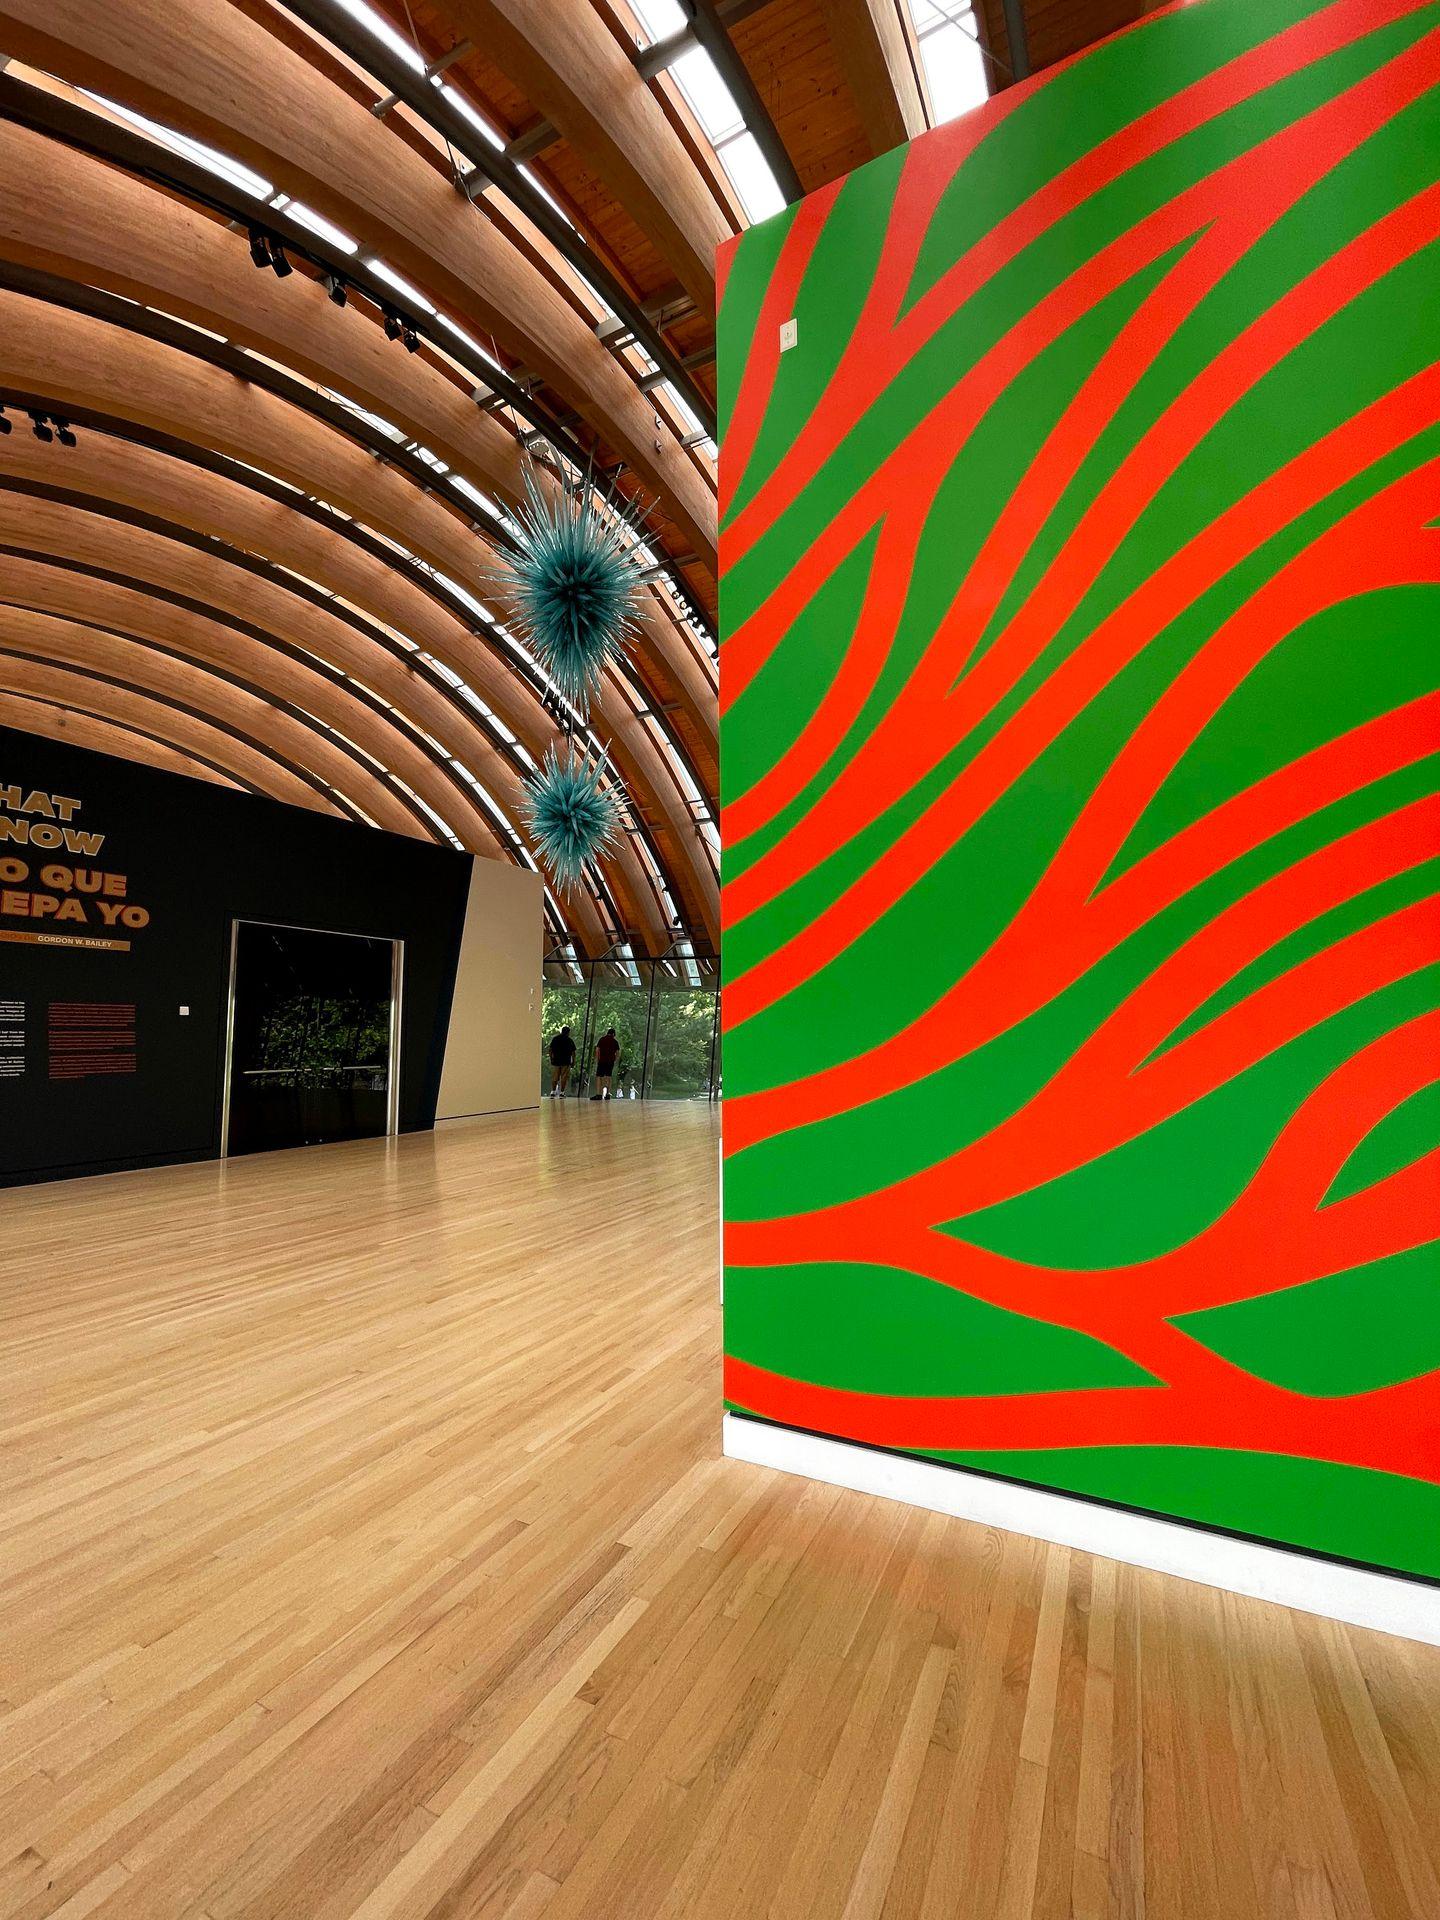 A wall with a vibrant display of red and green. The ceiling is a dome.